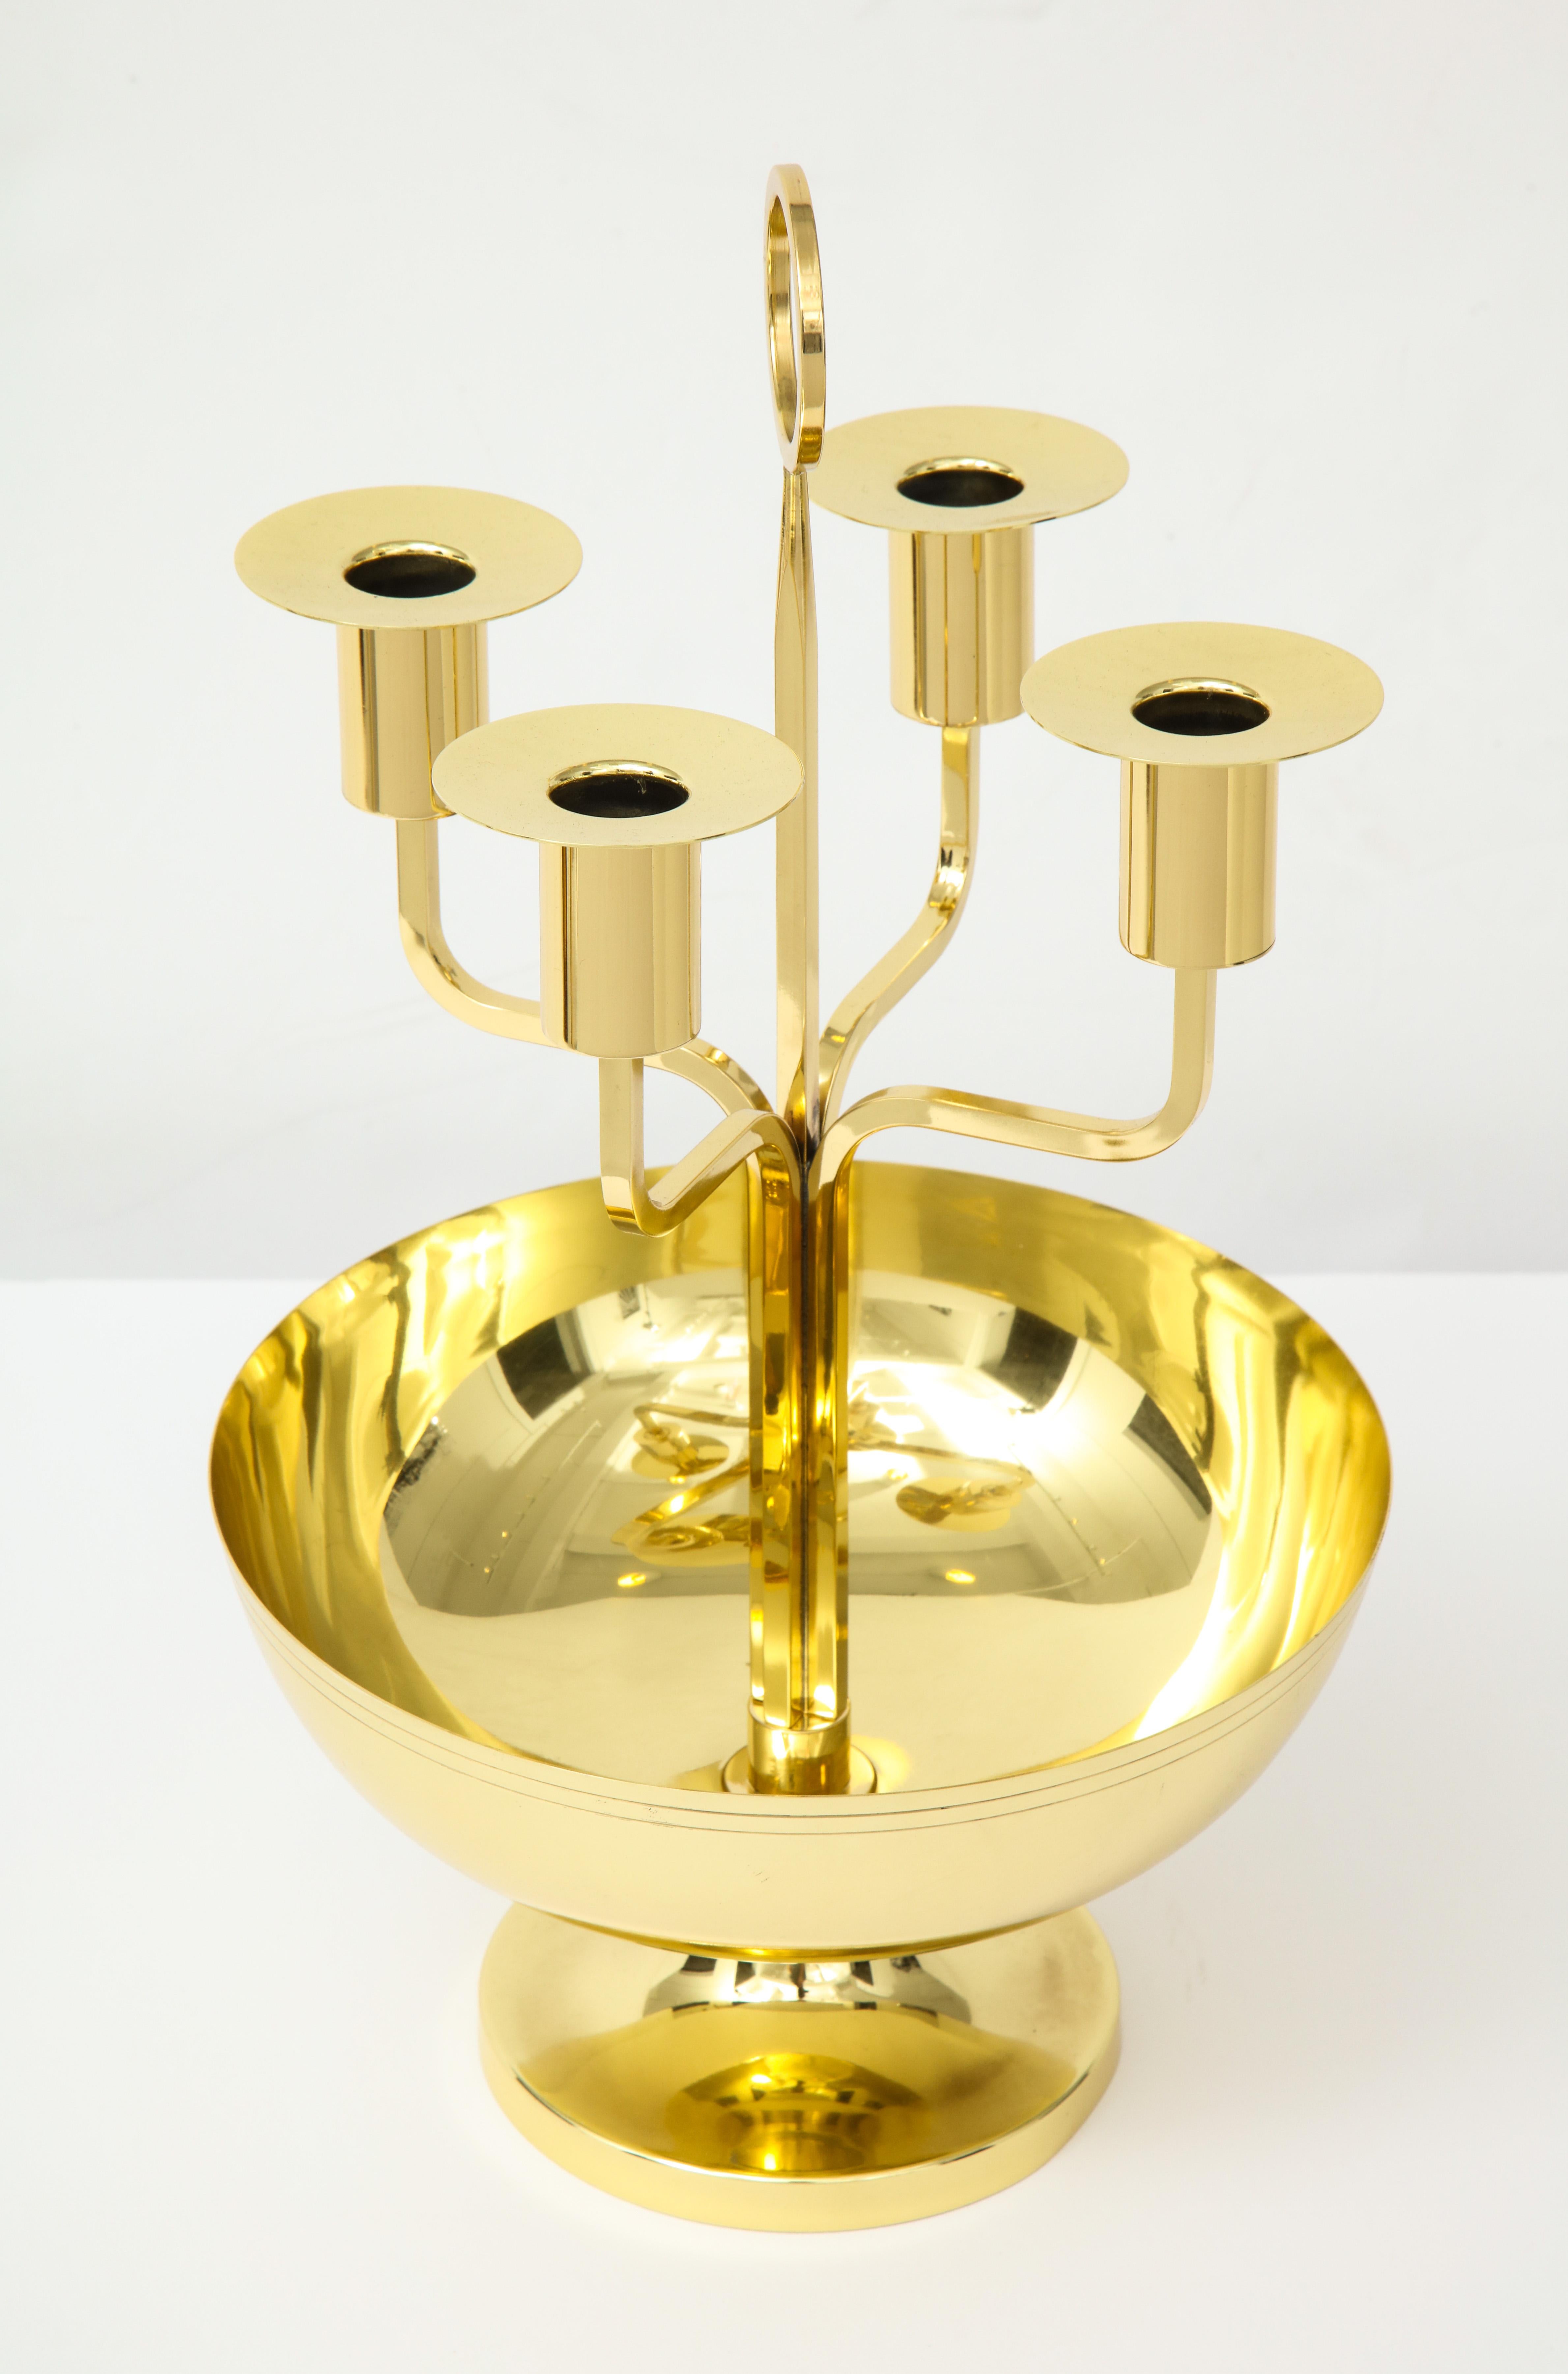 Polished brass centrepiece featuring a shallow bowl for flowers and 4 candleholders. Engraved parallel pinstripe detail around the perimeter of the bowl. Tommi Parzinger for Dorlyn. Professionally polished and lacquered.